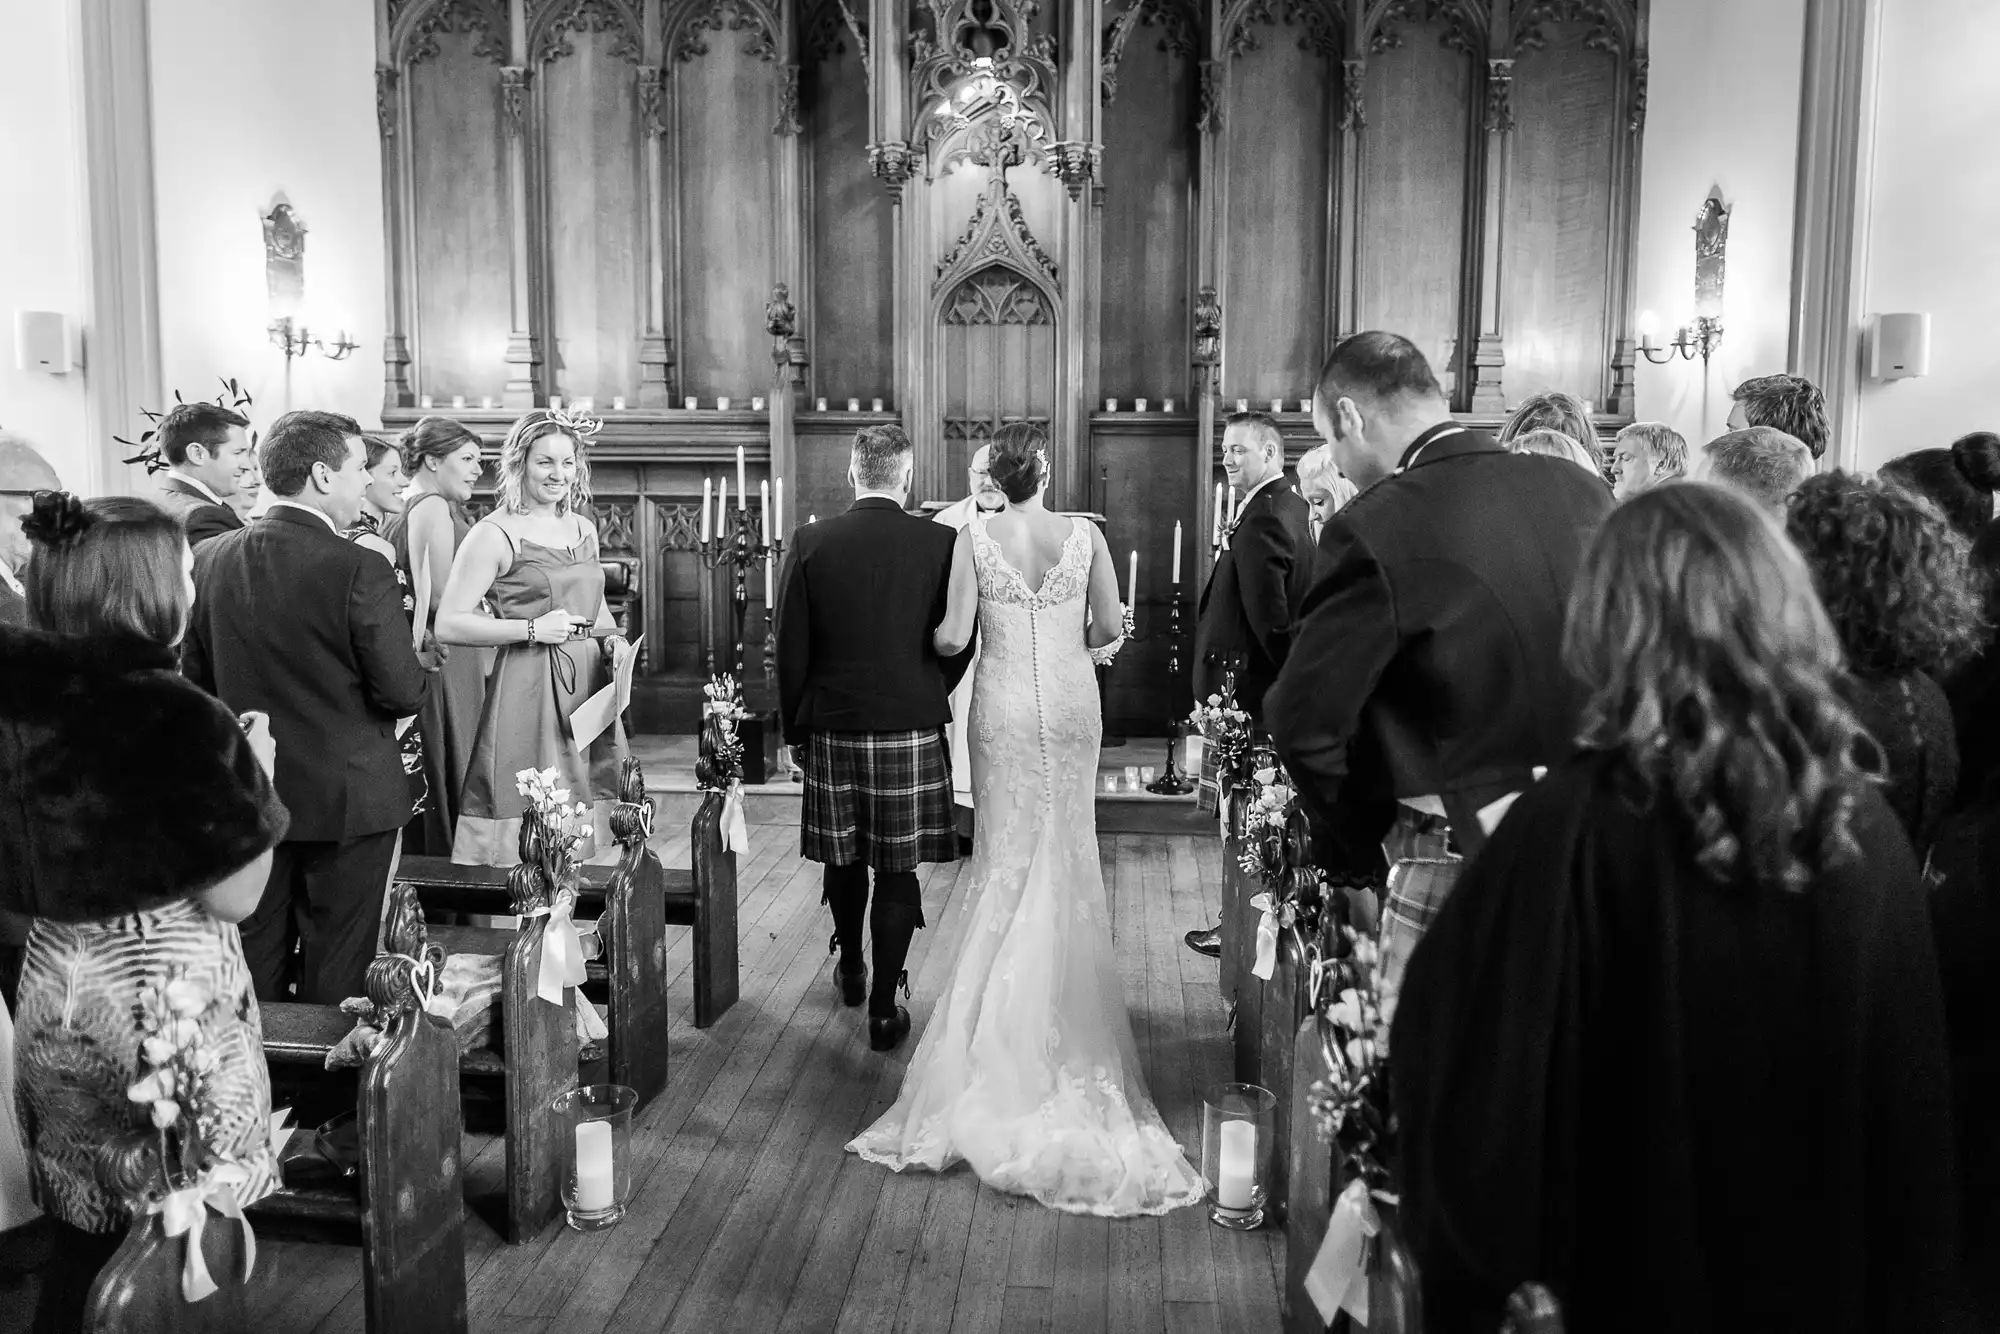 A bride and groom walk down the aisle of a church filled with guests during their wedding ceremony, captured in black and white.